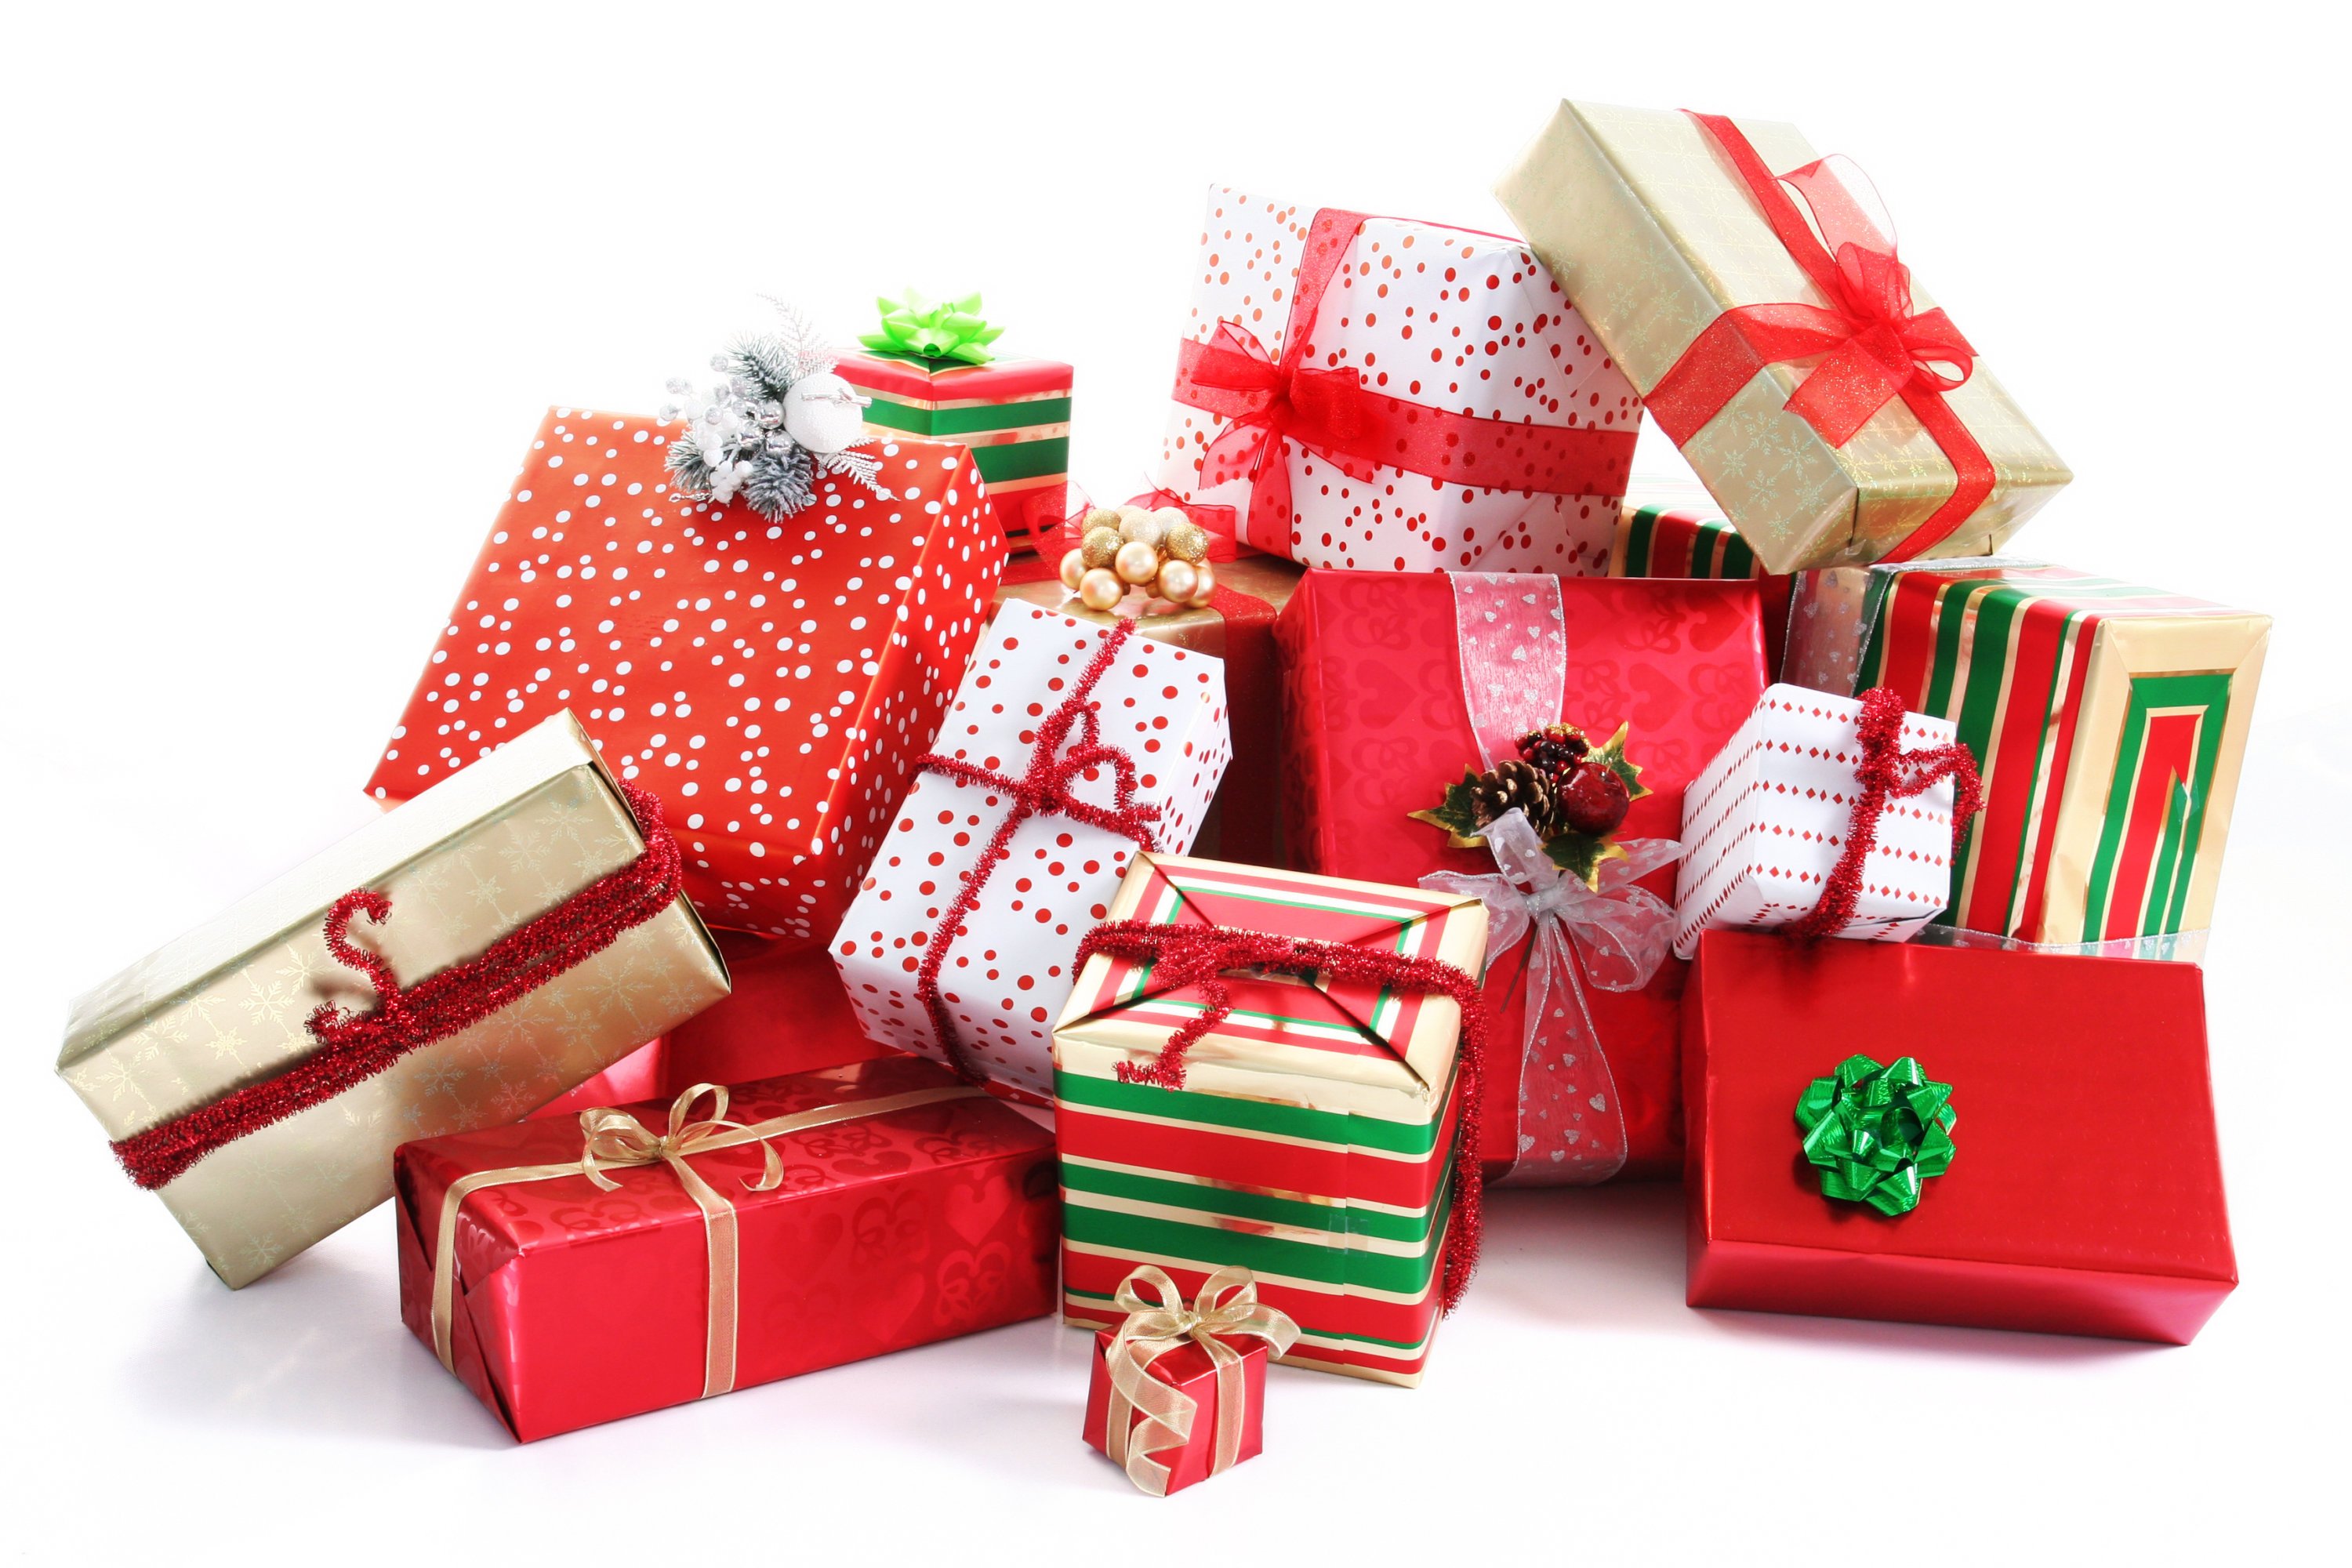 Last Minute Gift Guide  Curbside Pickup Retailers and Gifts 